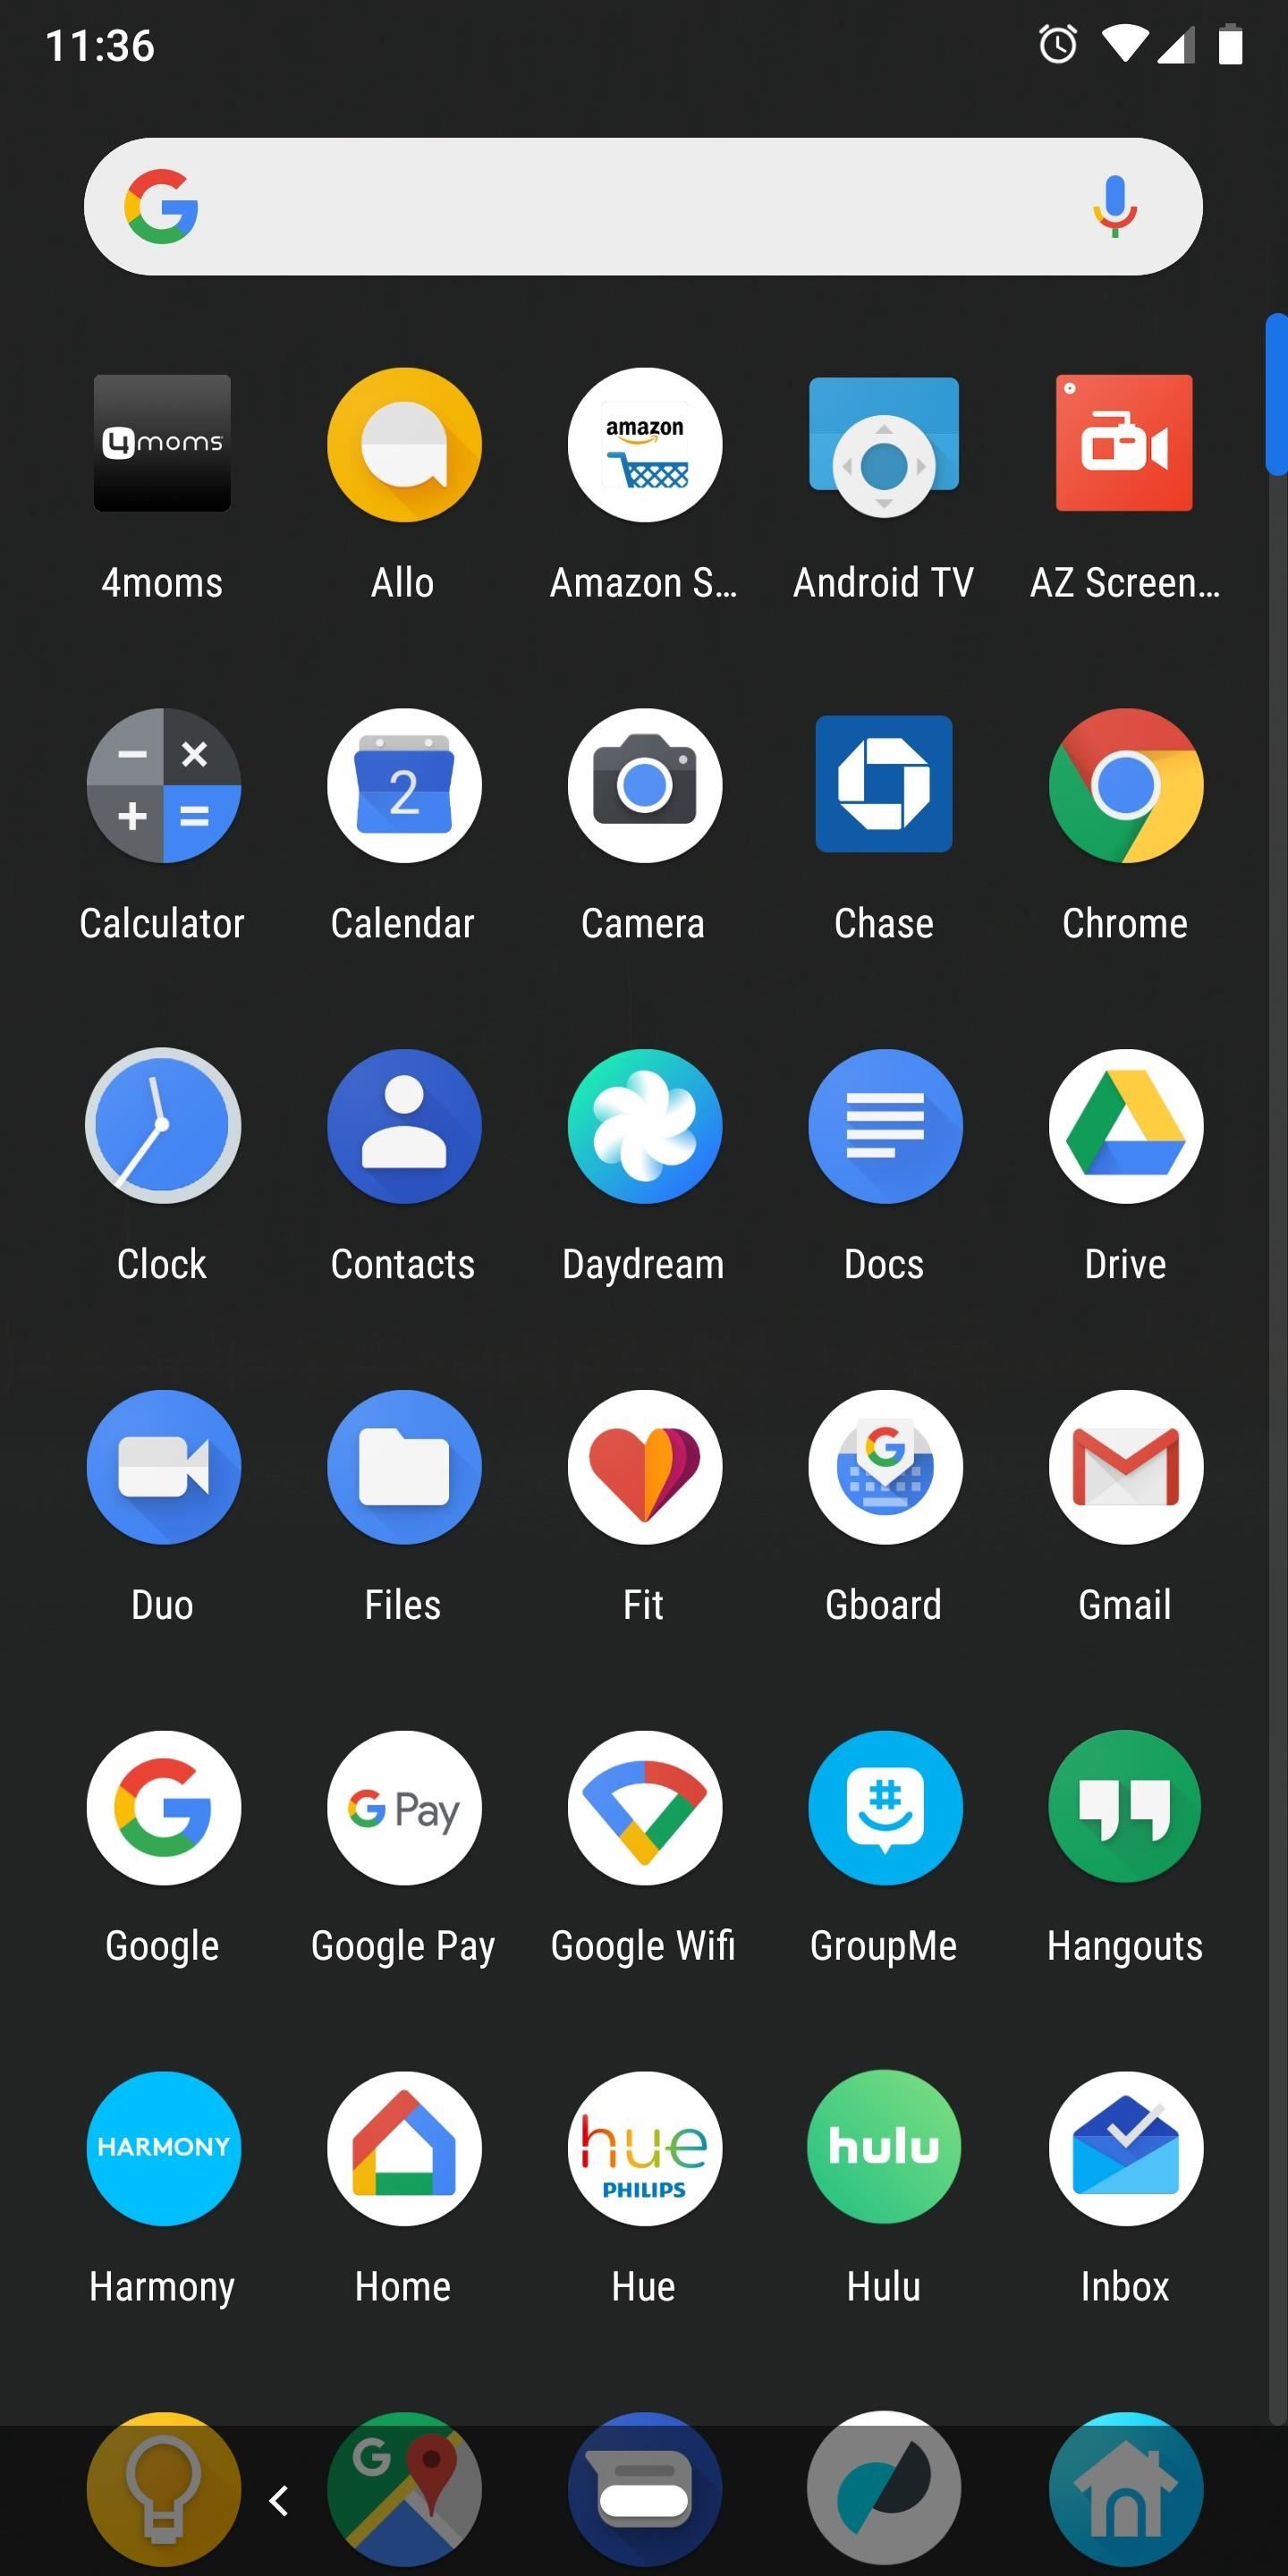 How to Enable Android 9.0 Pie's New Manual Dark Theme on Your Google Pixel